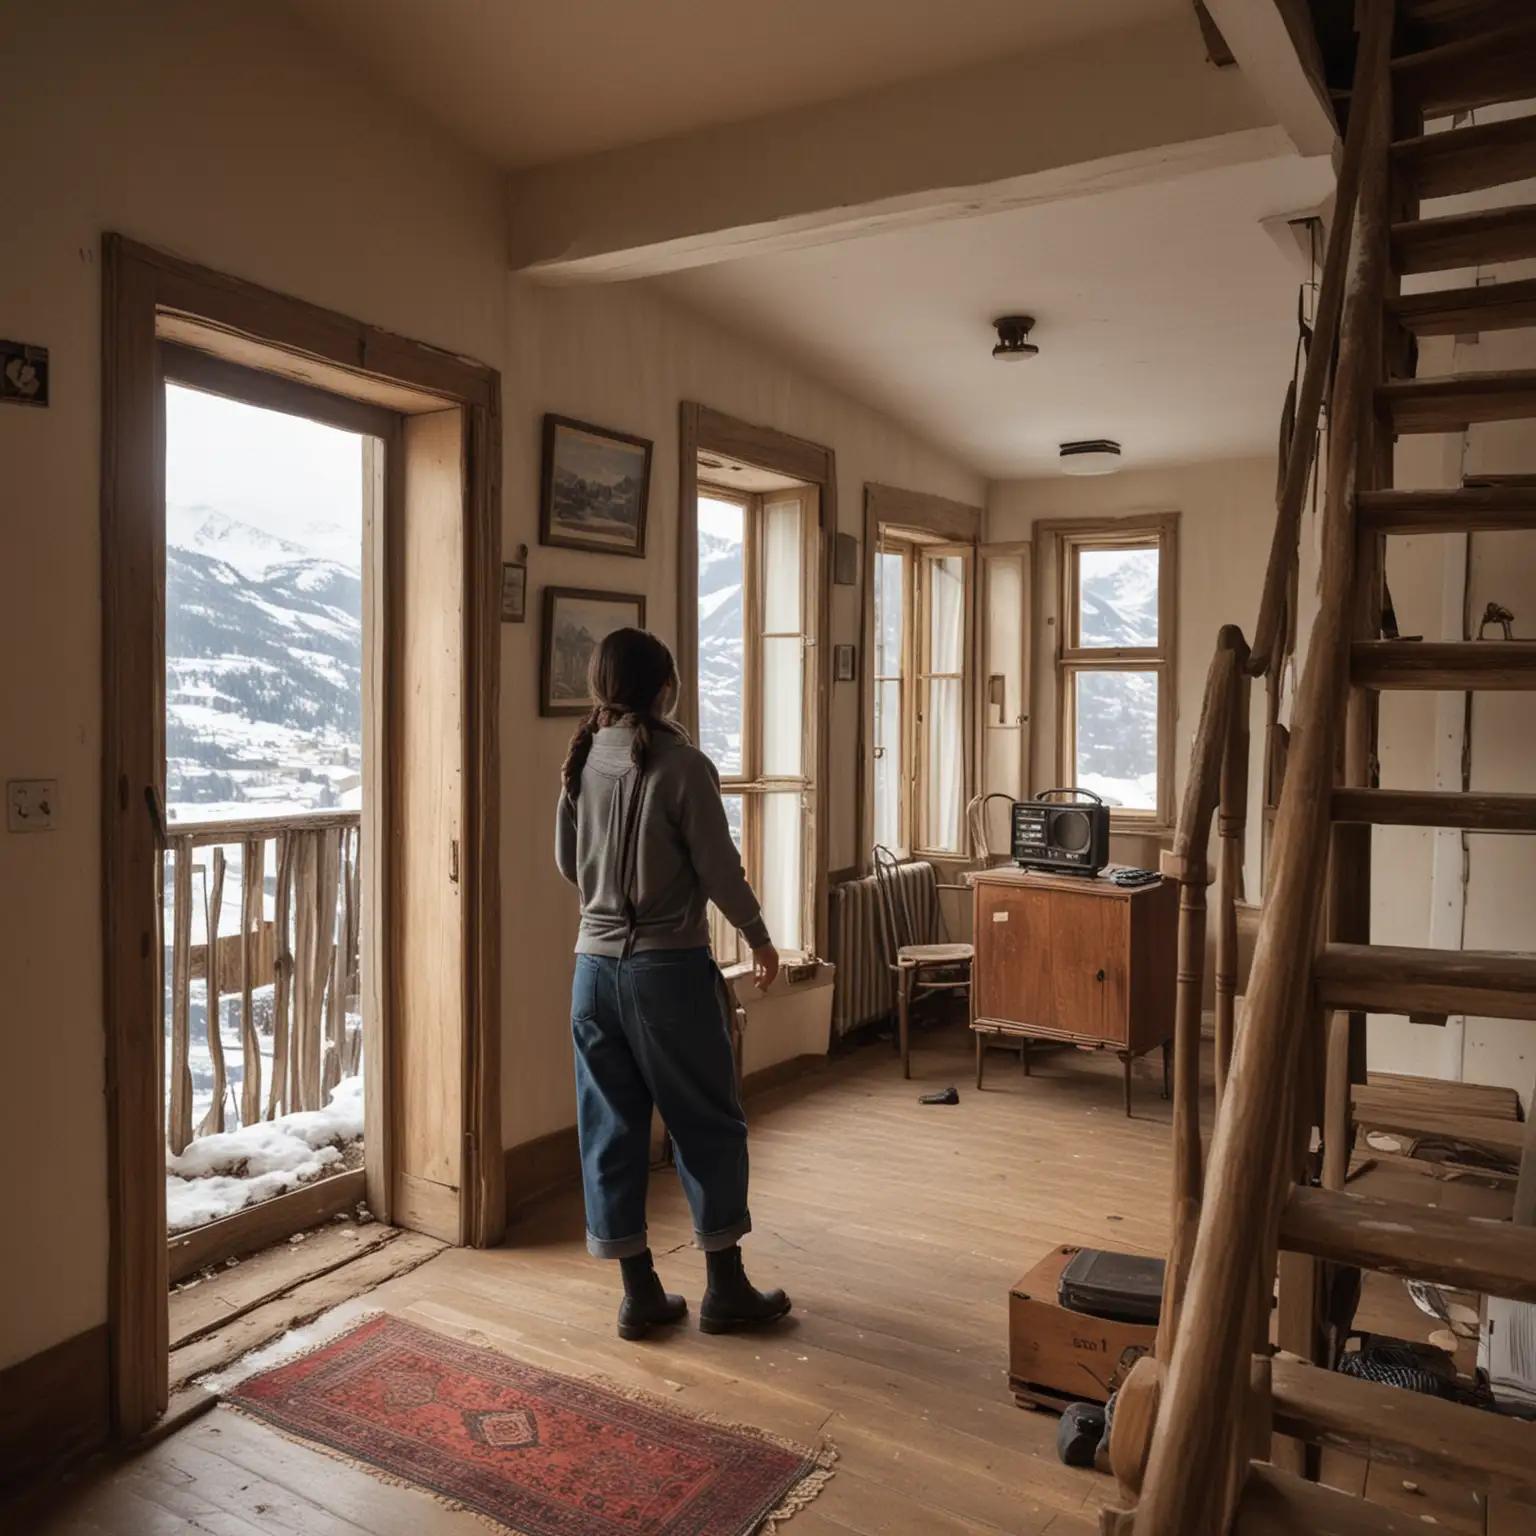 A young, sportsweared woman in her early 20s walks up the wooden stairs to the upper floor of the village house and is confronted by a window overlooking the snowy mountains. While the woman is standing in the centre of the room, she sees an old radio on an old console on the right side and is looking towards it. 